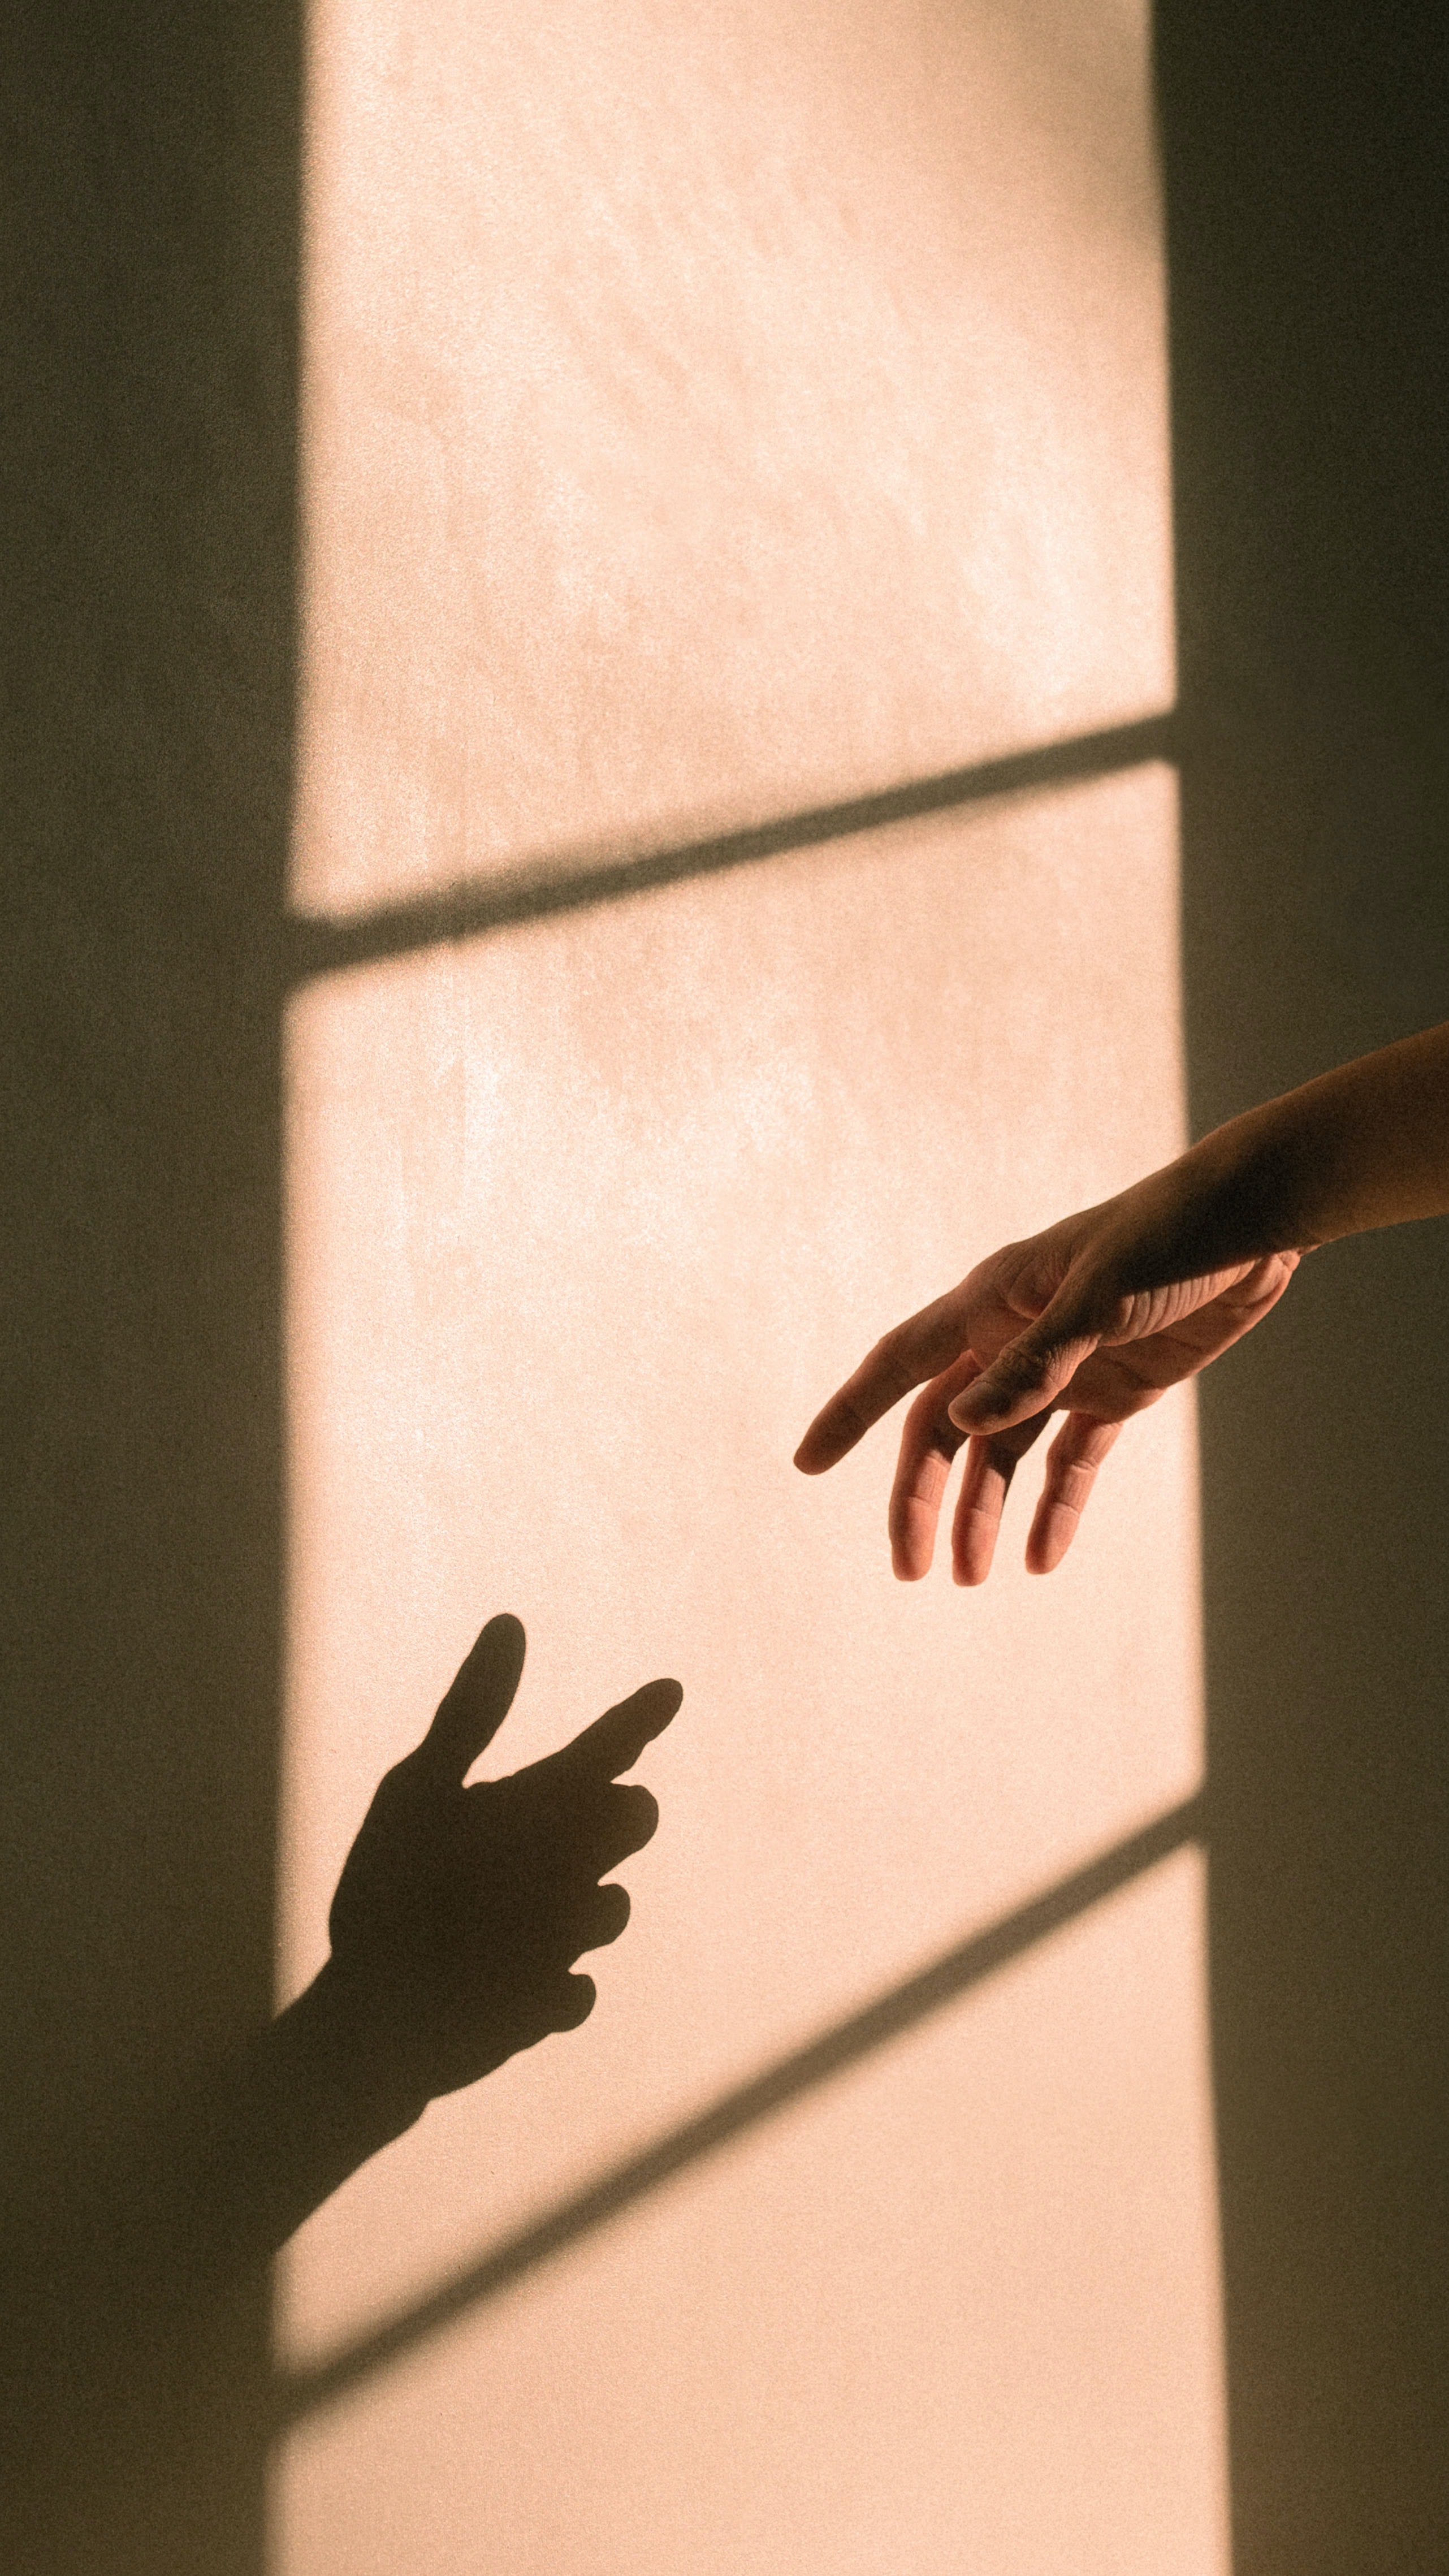 hand, miscellanea, miscellaneous, shadow, touching, touch